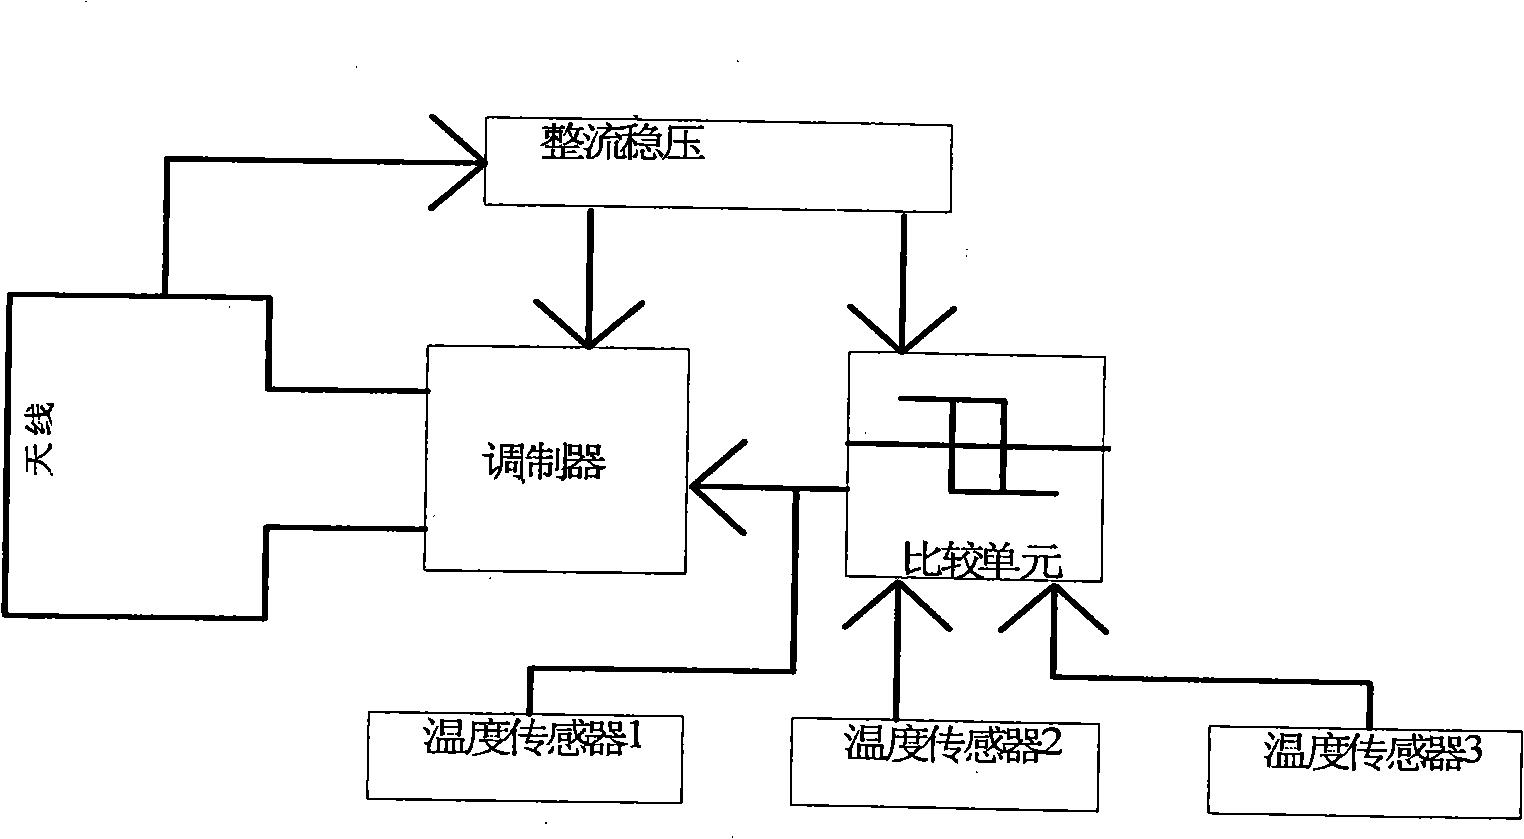 Method for detecting whether a stove on electromagnetic oven